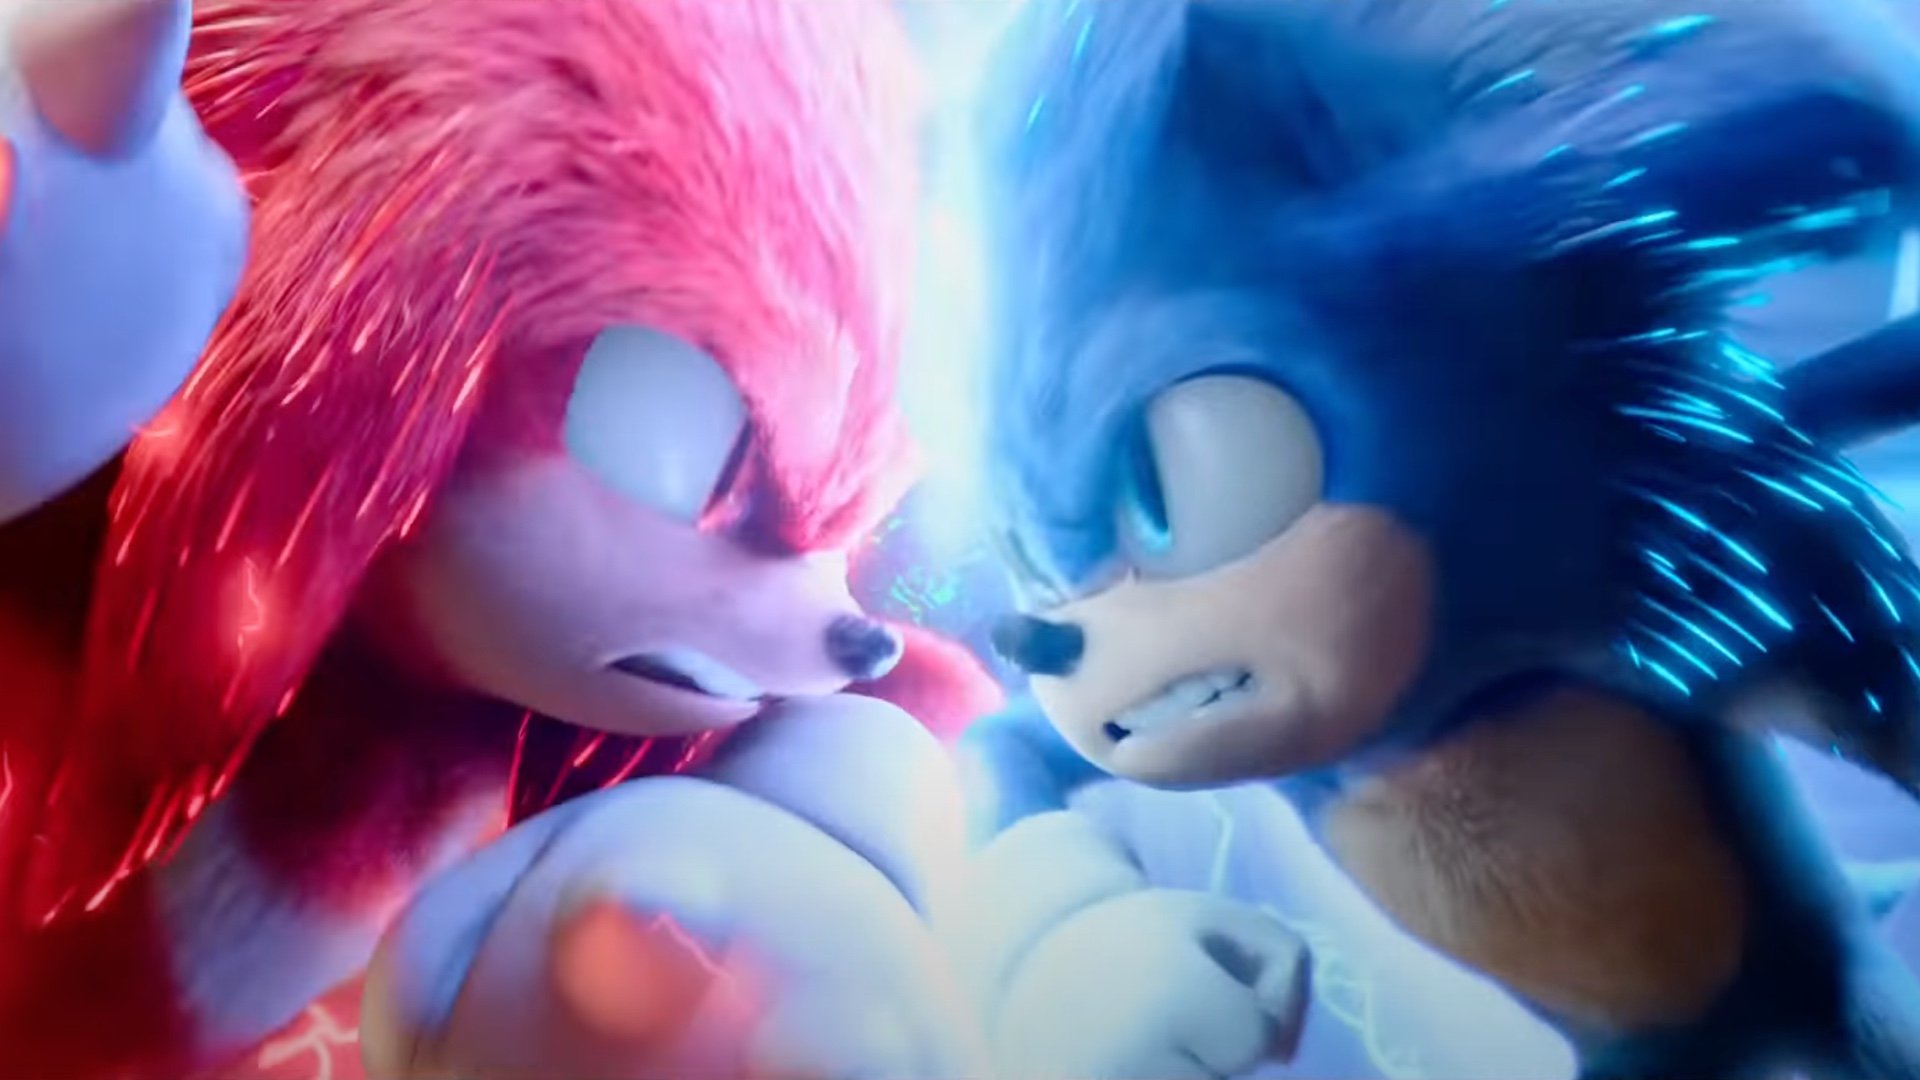 2 New Promo Spots for SONIC THE HEDGEHOG 2 - "The Ultimate Showdown Begins"  — GeekTyrant